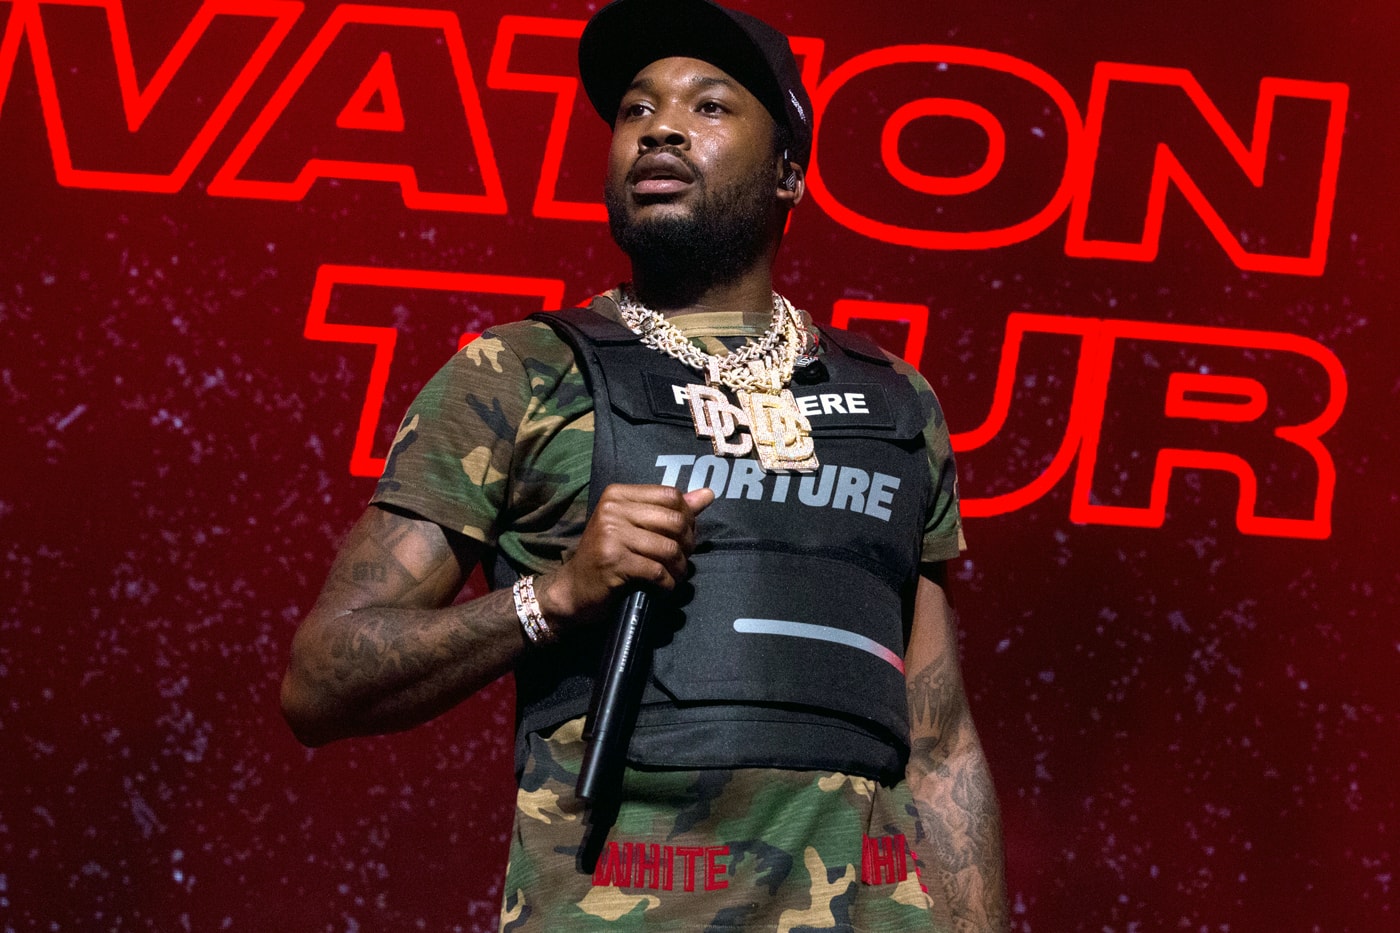 meek mill 2019 united states us north american spring tour dates february march new york times piece op ed prison reform info details sale tickets editorial